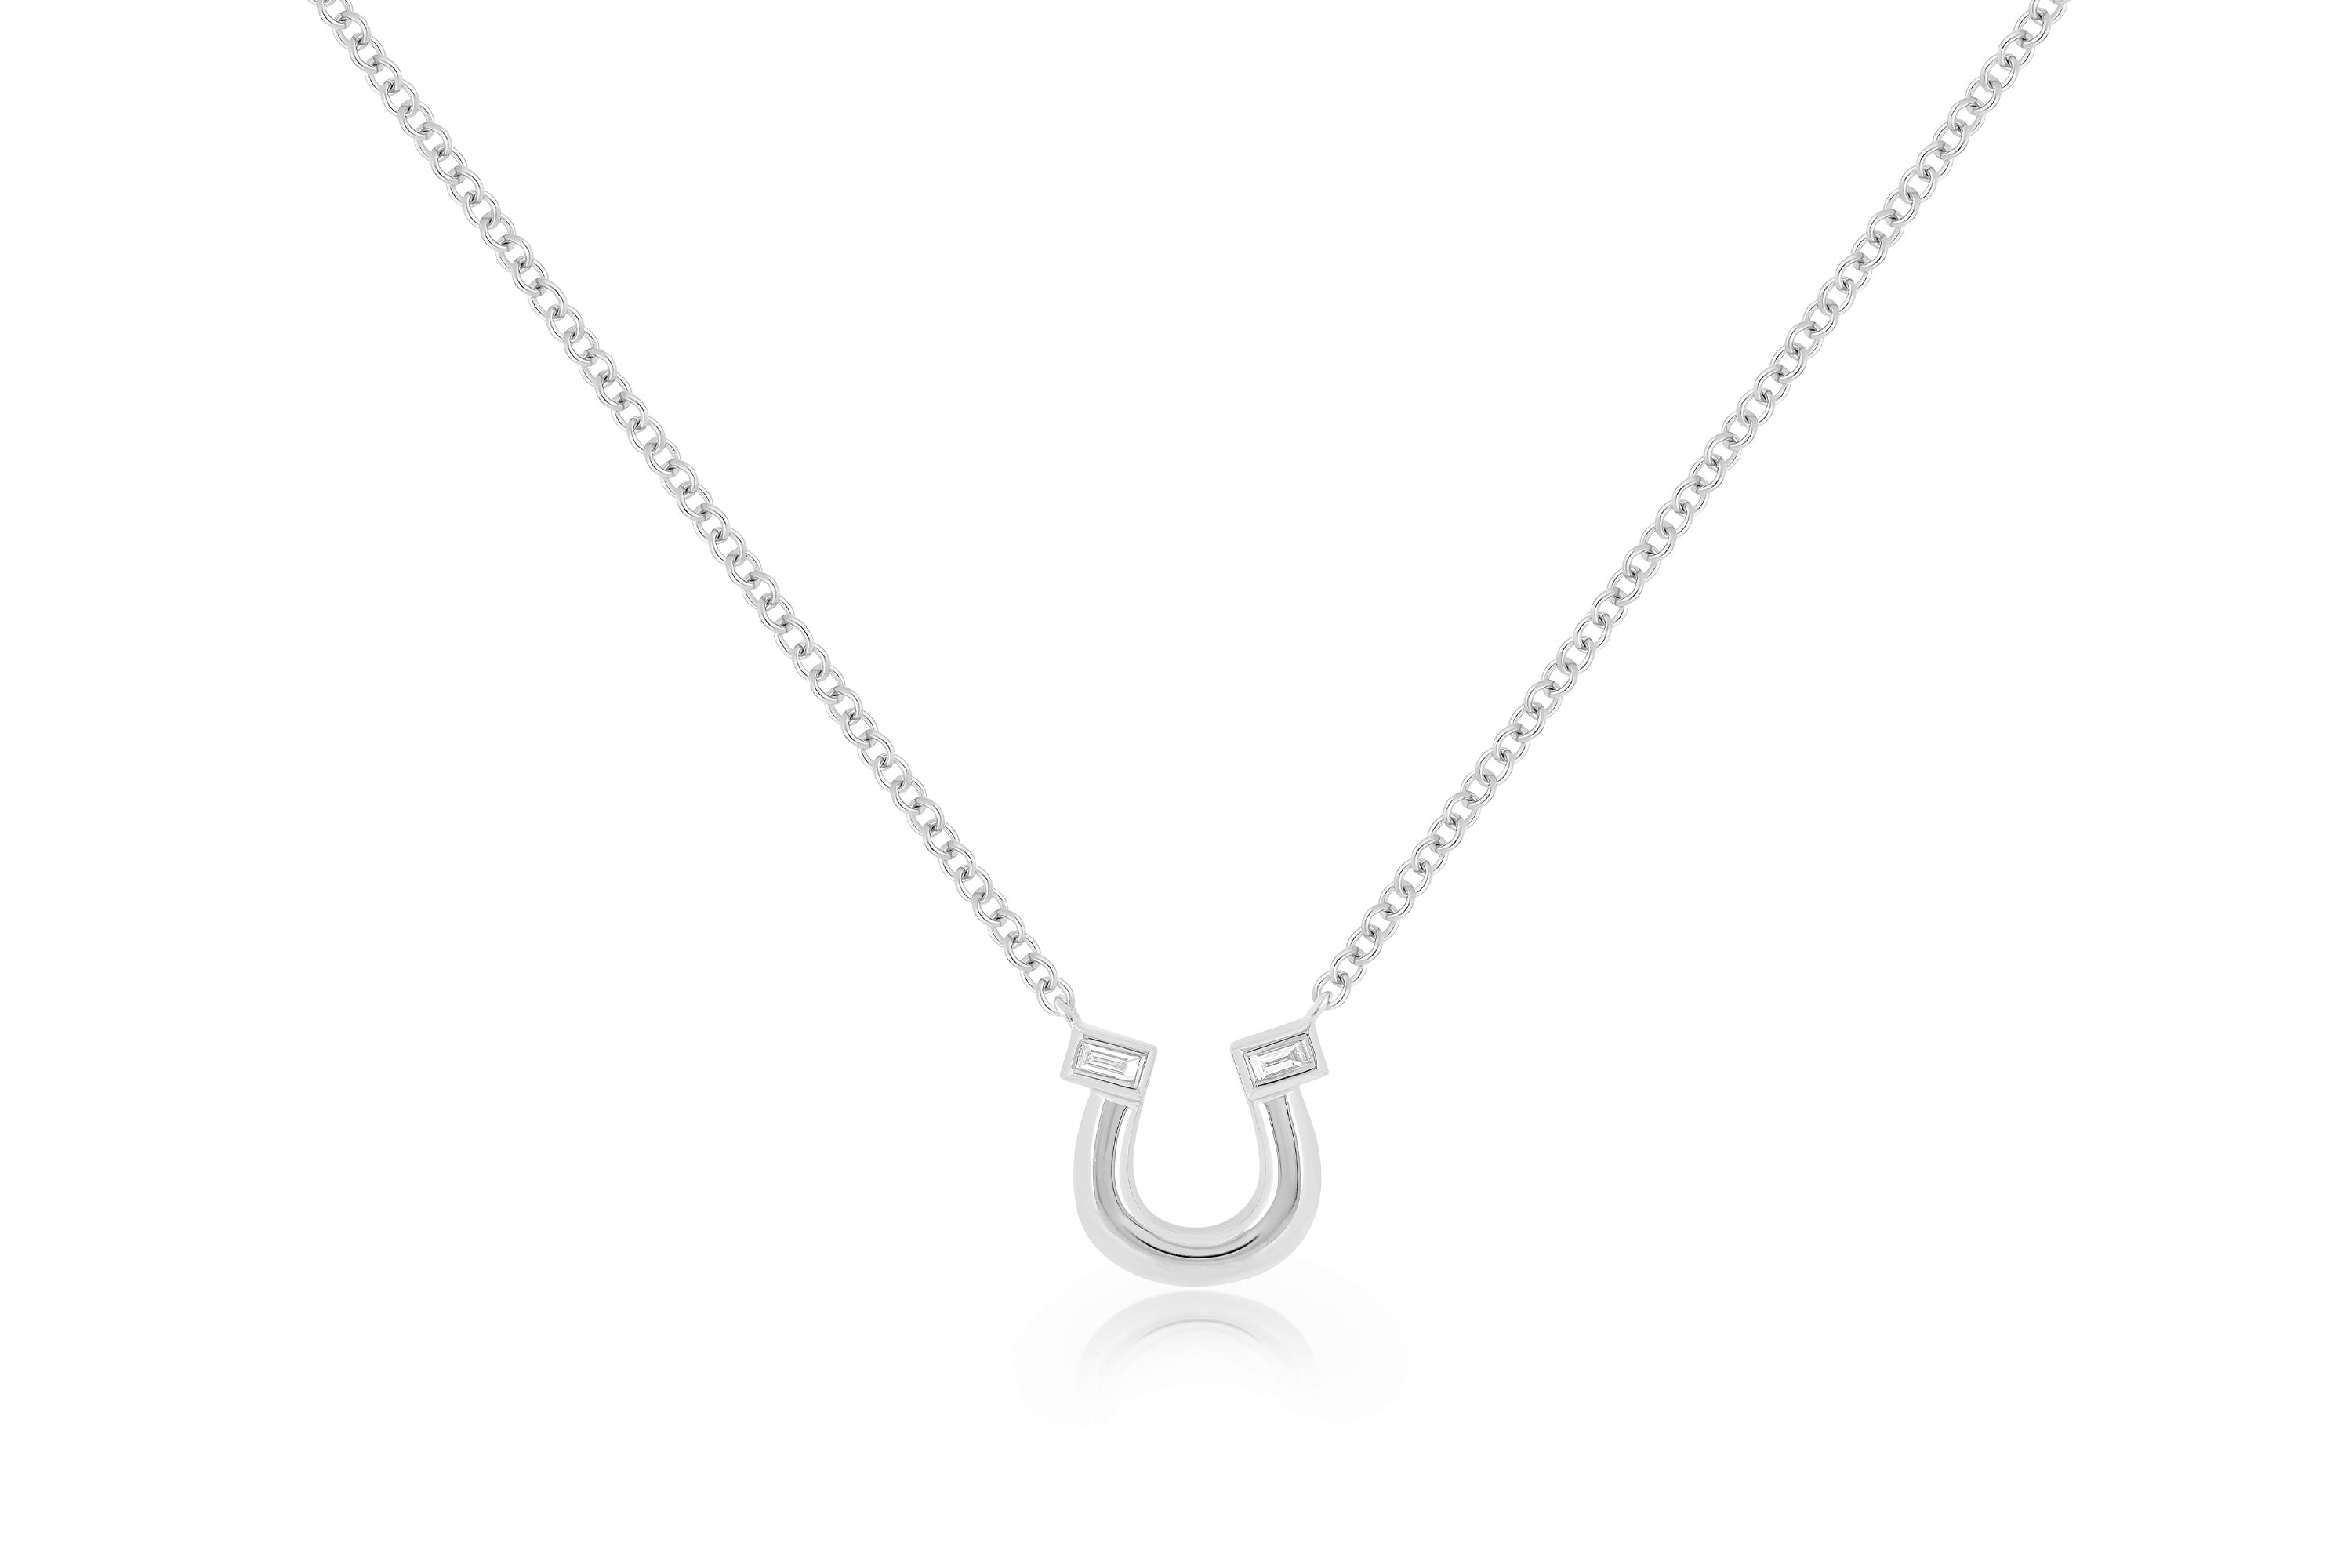 White Gold Horseshoe Necklace with two Baguette Diamonds